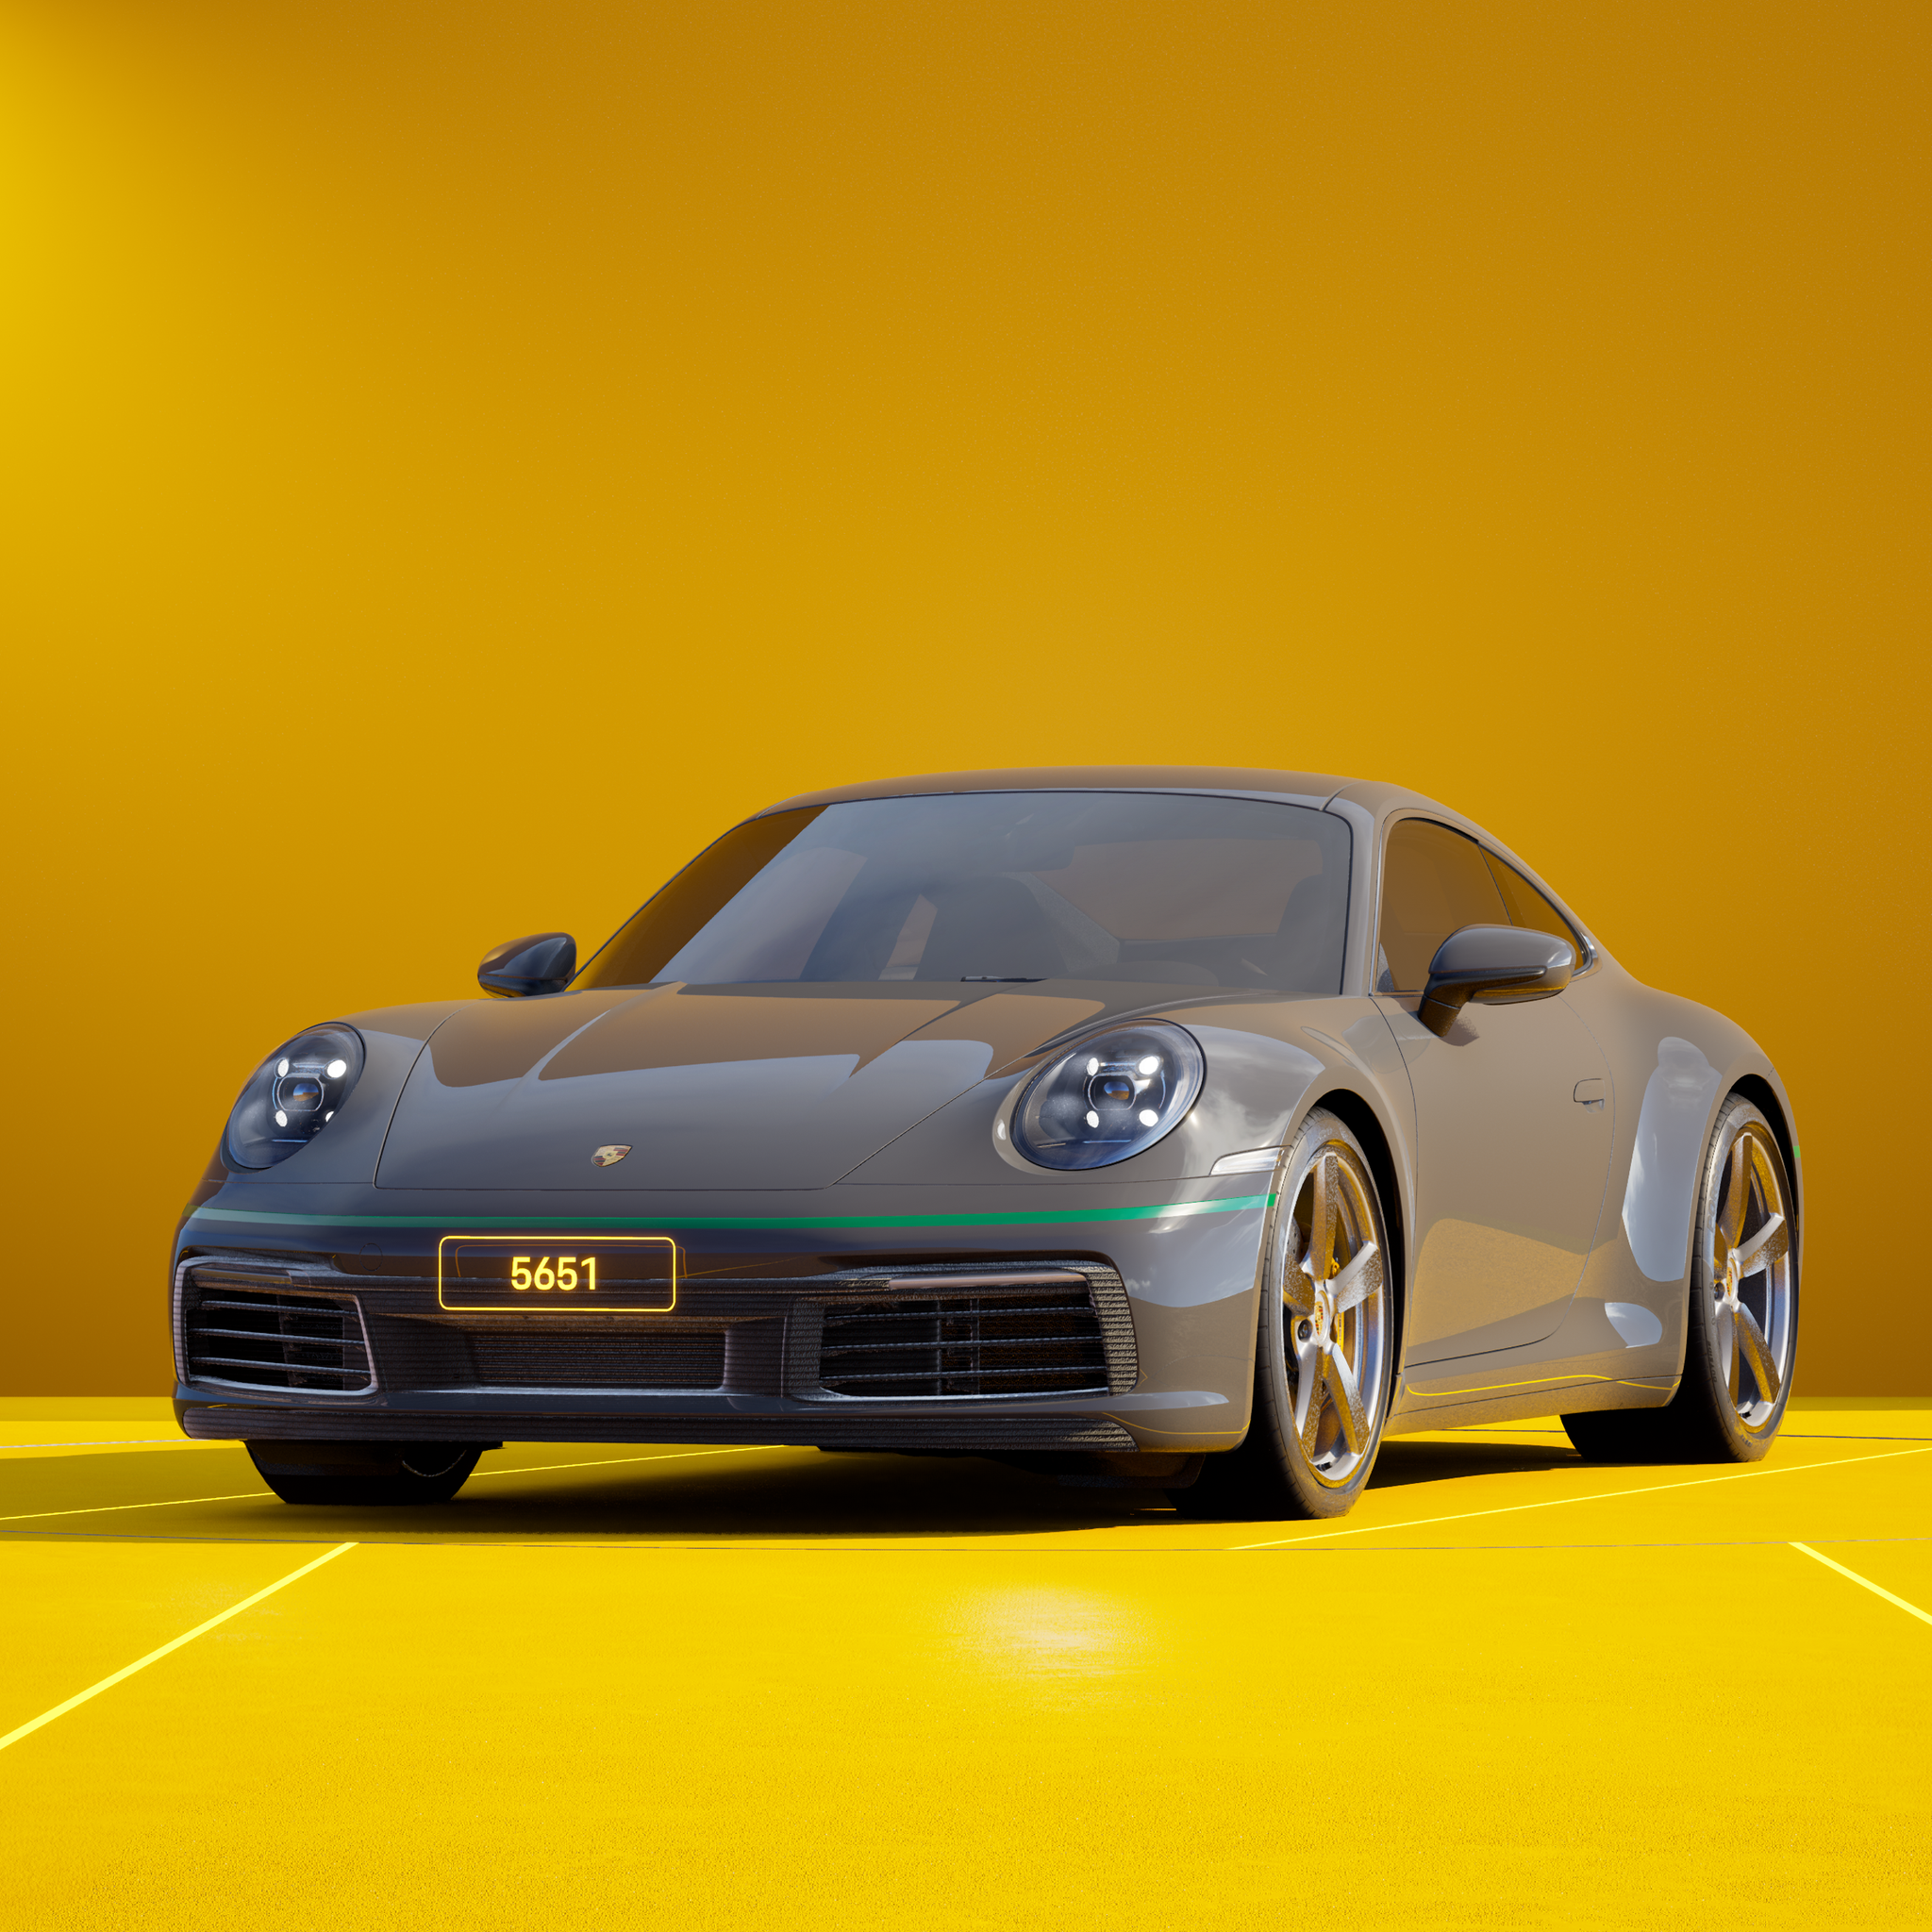 The PORSCHΞ 911 5651 image in phase